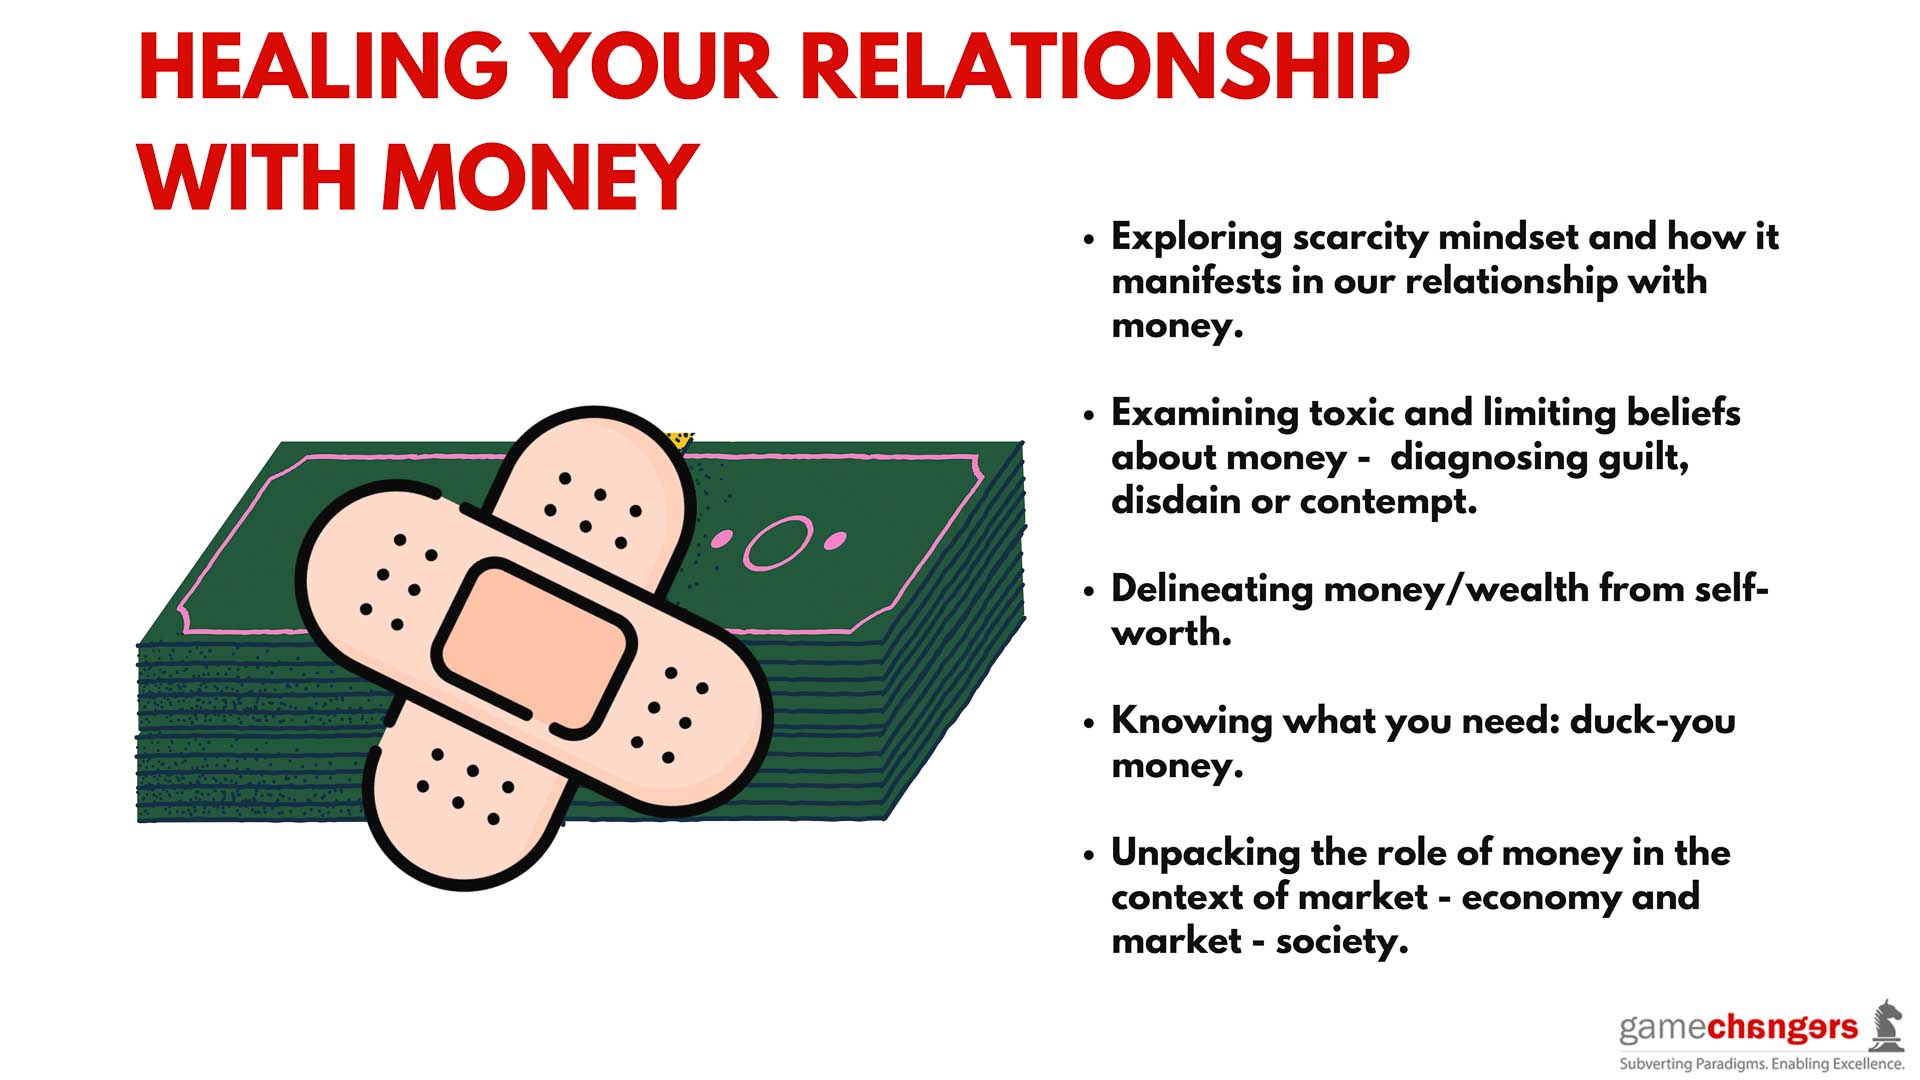 “eil-relationship-with-money-14”